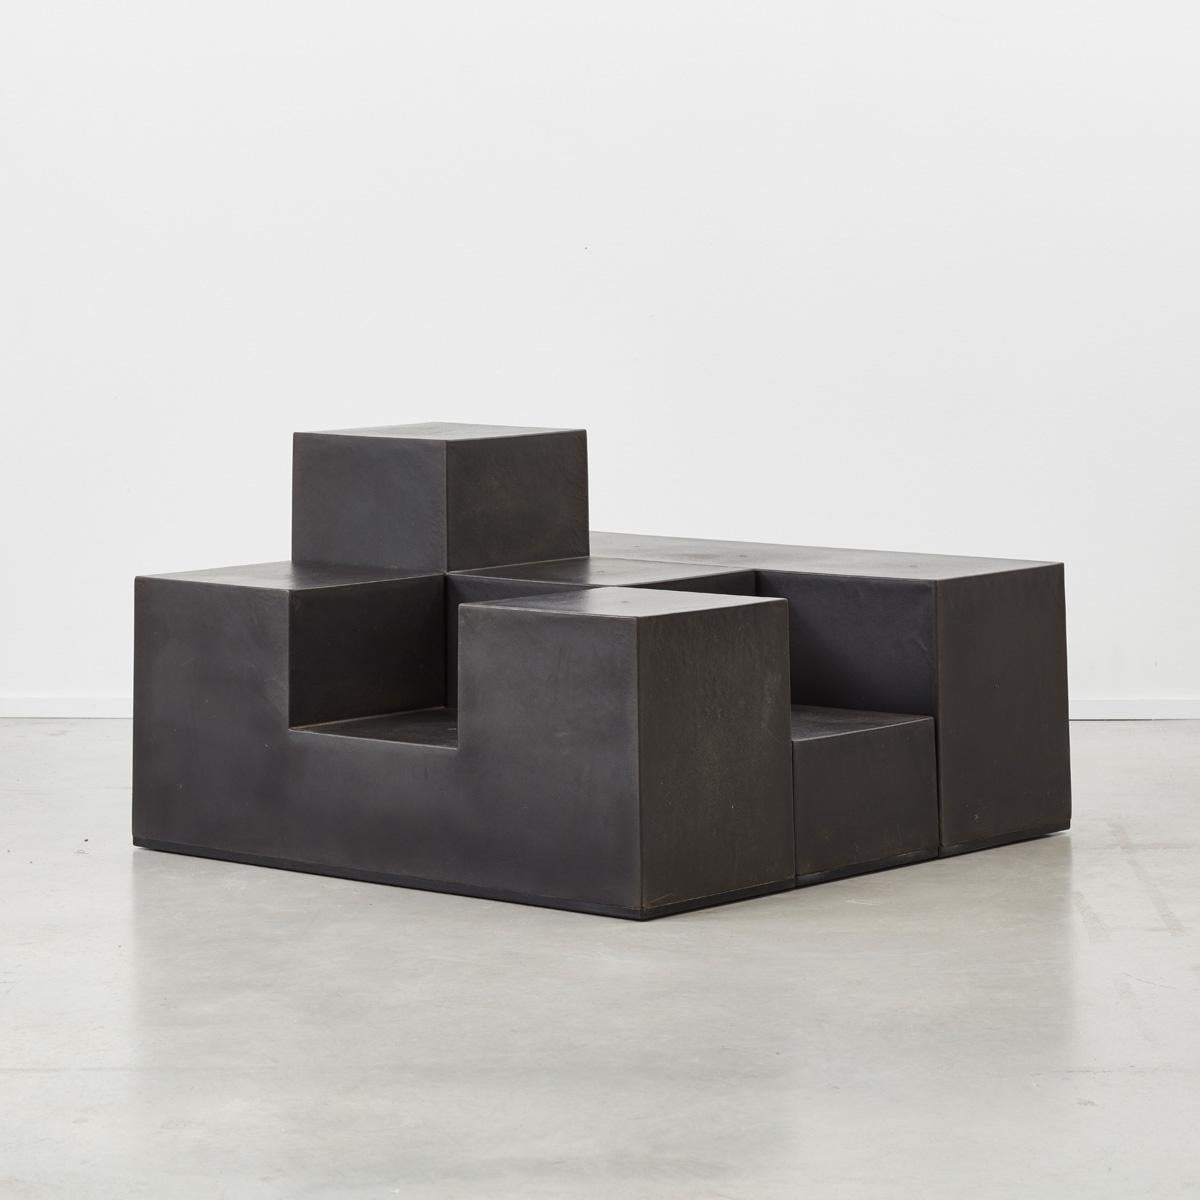 Italian architect Mario Bellini is well known for creating powerful, thoughtful and creative pieces of design. The Gli Chess series works both as modular tables or seating. The versitility in interconnectivity between the differing forms places